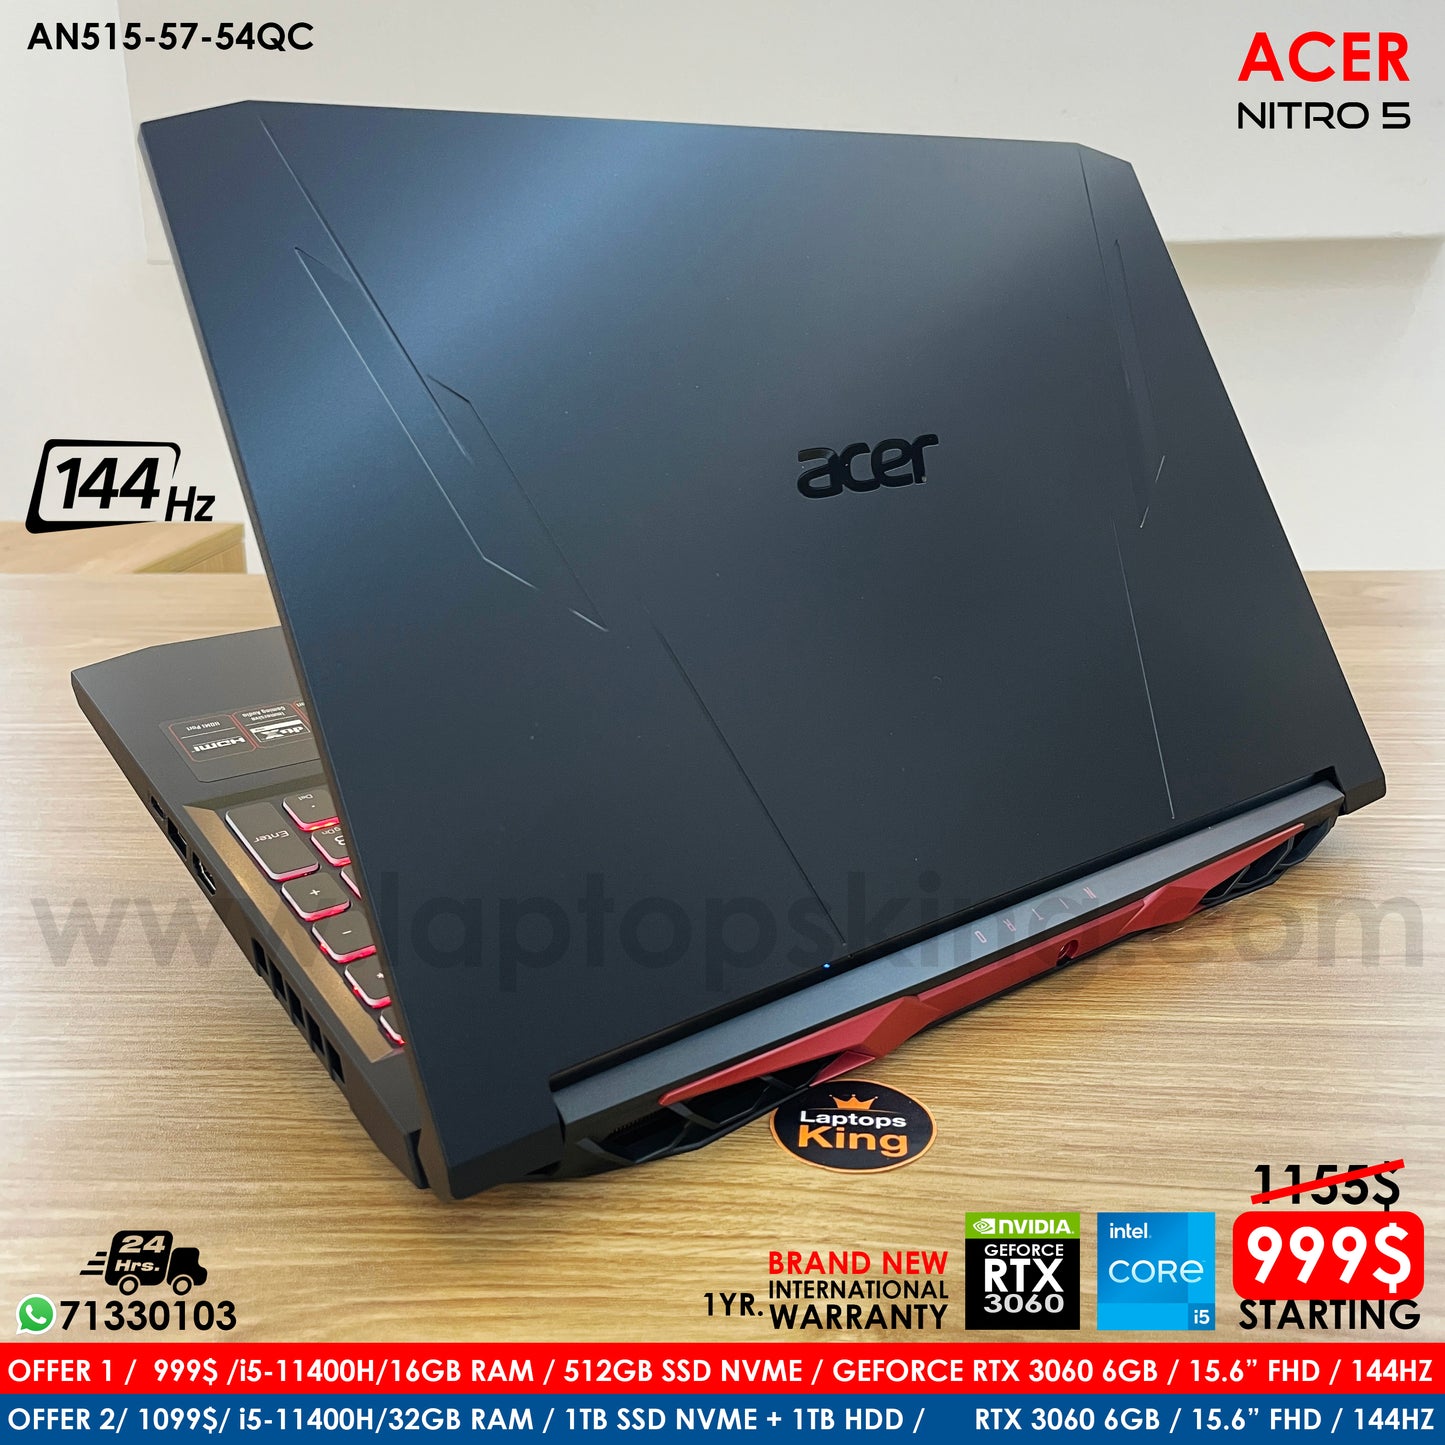 Acer Nitro 5 AN515-57-54QC i5-11400h RTX 3060 144HZ Gaming Laptop Offers (Brand New), Gaming laptop, Graphic Design laptop, best laptop for gaming, Best laptop for graphic design, computer for sale Lebanon, laptop for video editing in Lebanon, laptop for sale Lebanon, Best graphic design laptop,	Best video editing laptop, Best programming laptop, laptop for sale in Lebanon, laptops for sale in Lebanon, laptop for sale in Lebanon, buy computer Lebanon, buy laptop Lebanon.